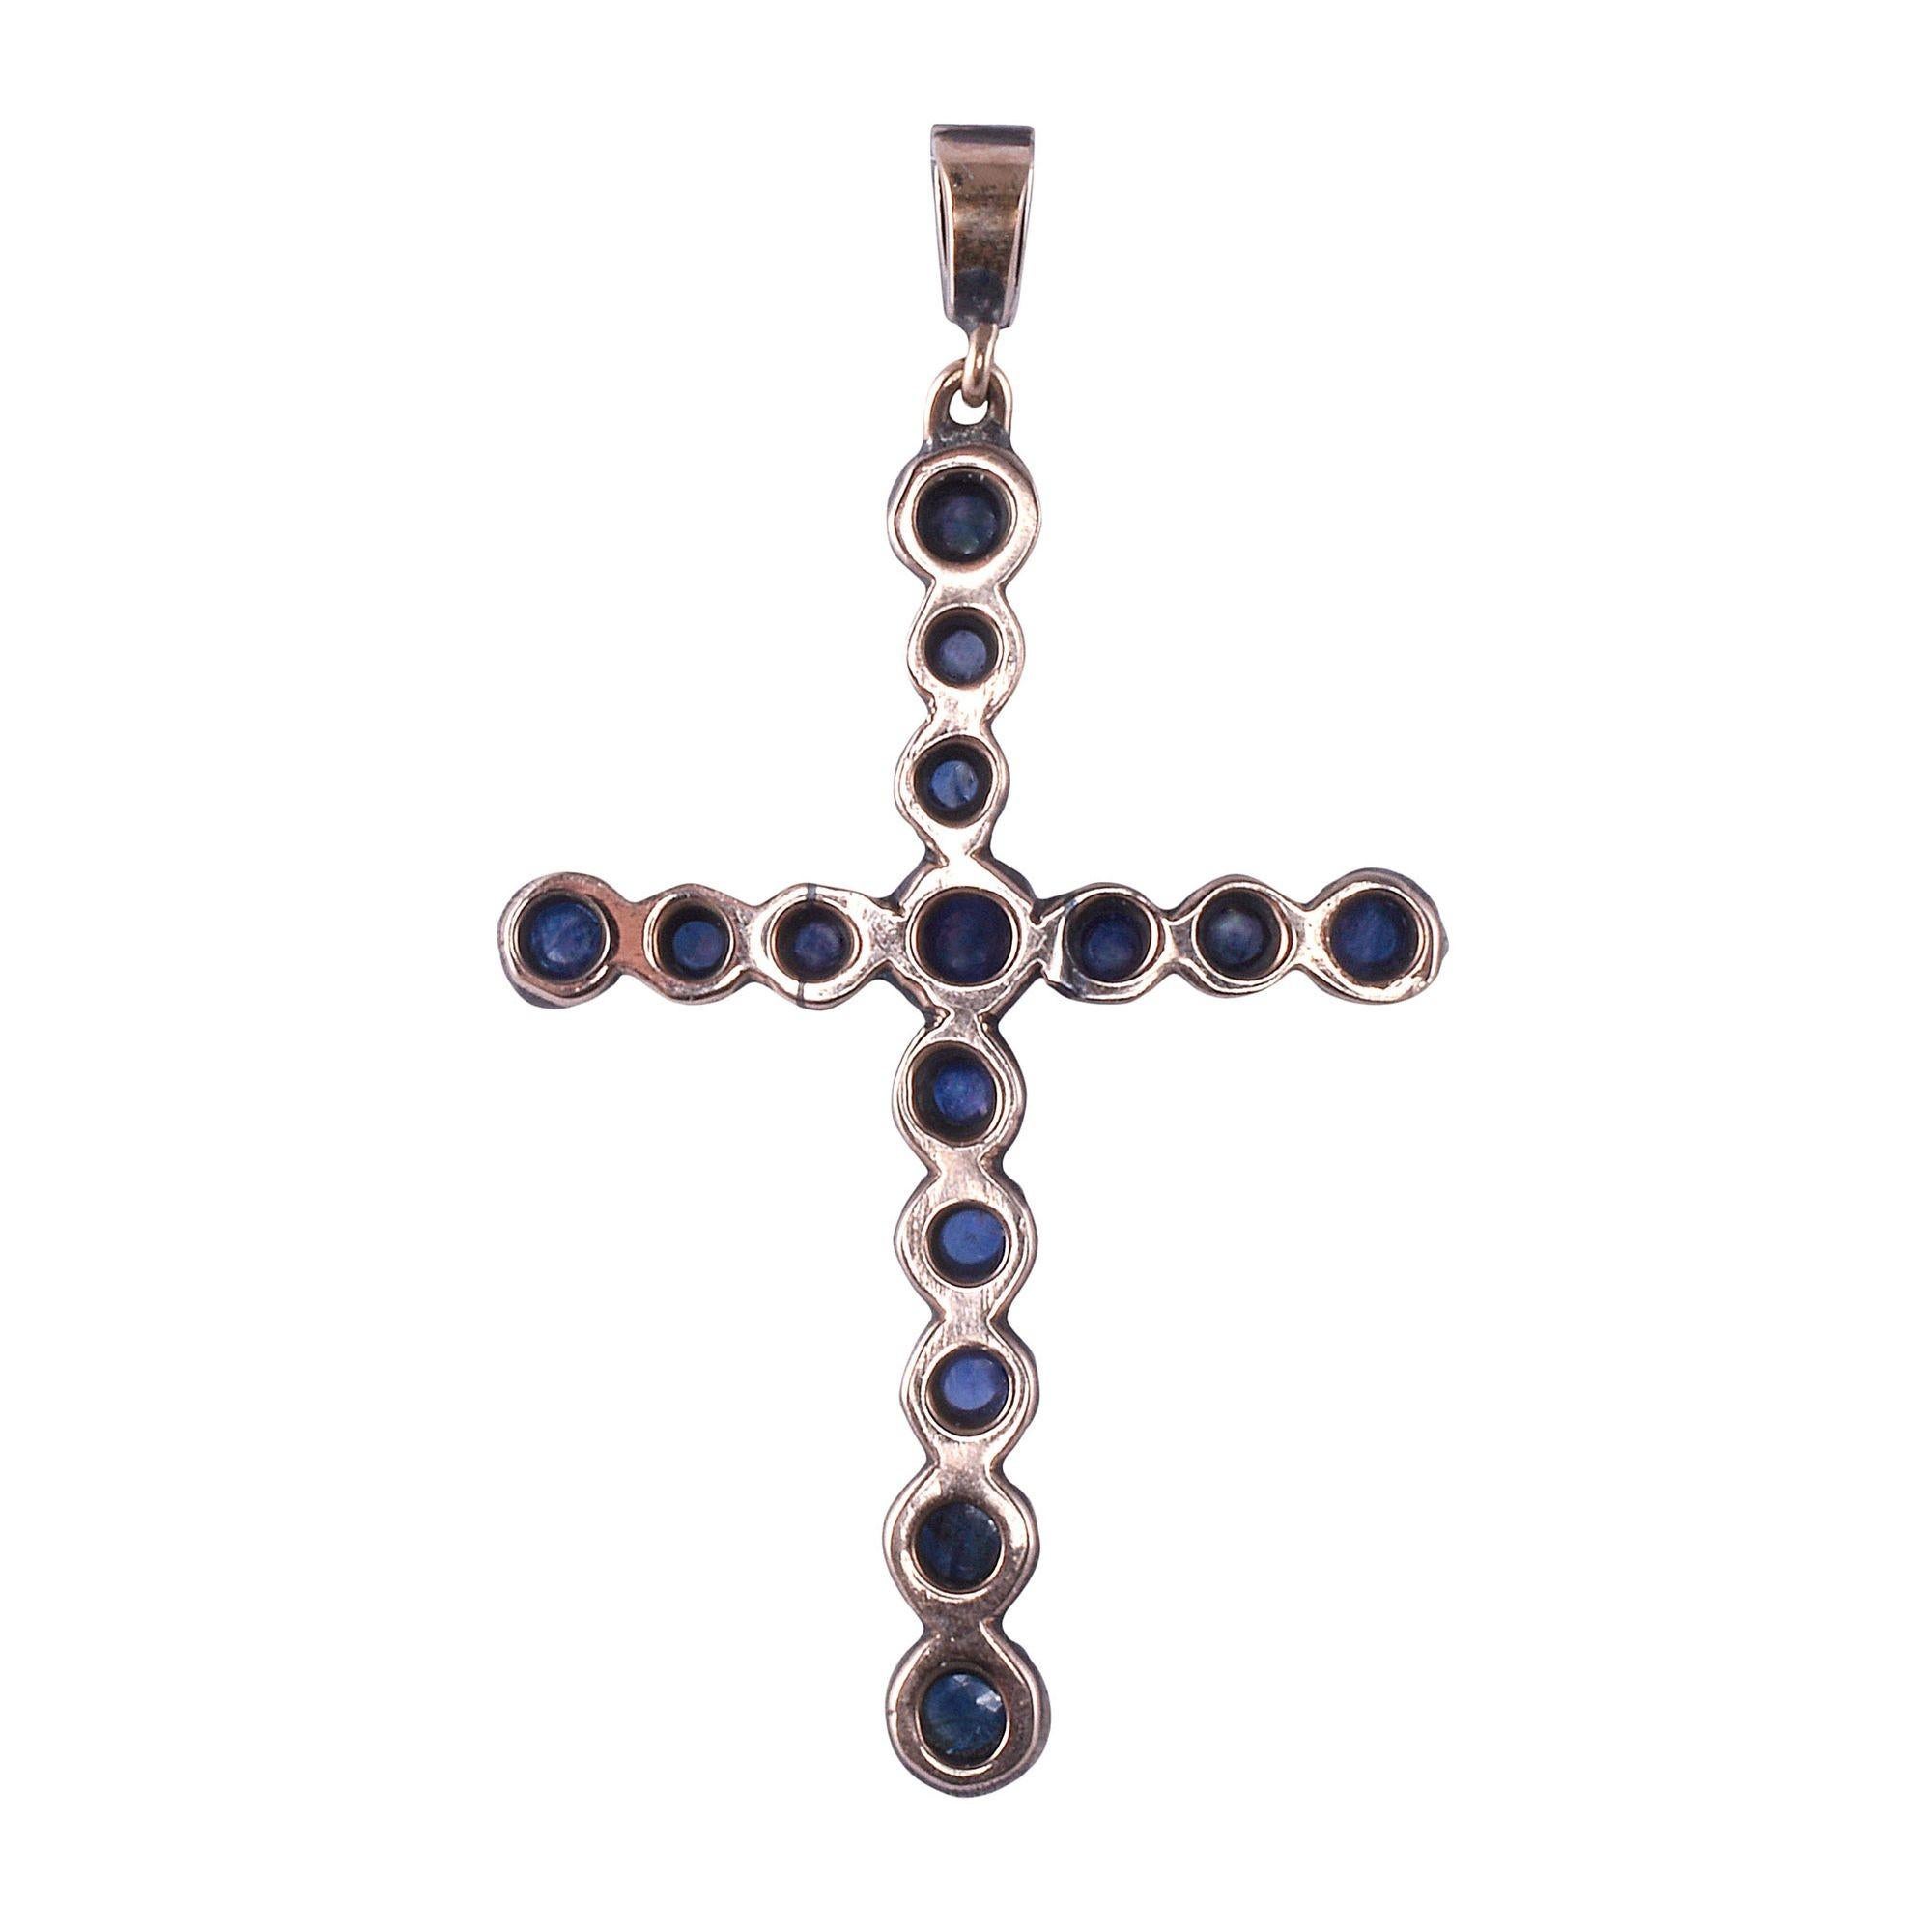 Antique English cabochon sapphire cross pendant, circa 1900. This antique cross pendant is crafted in 9 karat rose gold and sterling silver. The Victorian cross features cabochon sapphires of varying size. There are also three rose cut diamonds in